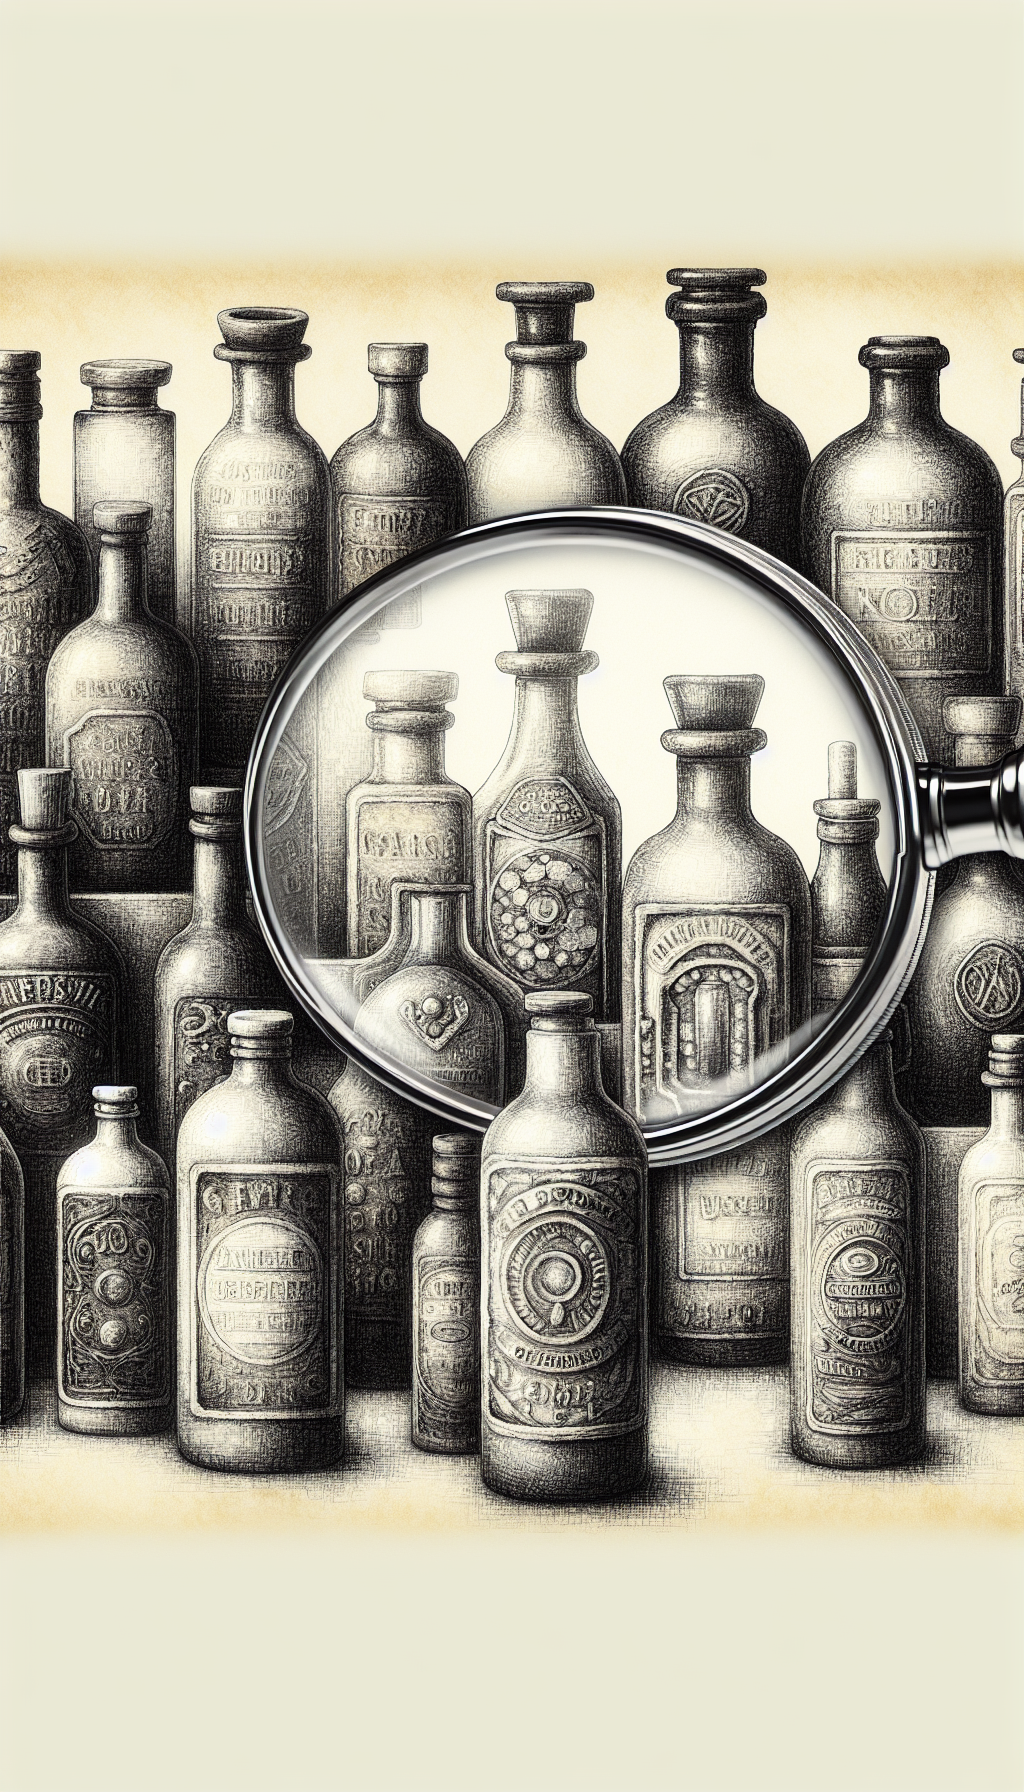 Beneath a magnifying glass, an eclectic mix of vintage bottles reveals intricate embossed letters and unique stamps; their textures and colors subtly transitioning between sketched, watercolor, and realistic styles. The magnifying glass focuses on the most prominent bottle, which glows with clarity, symbolizing the 'unearthed value' through the identification process.